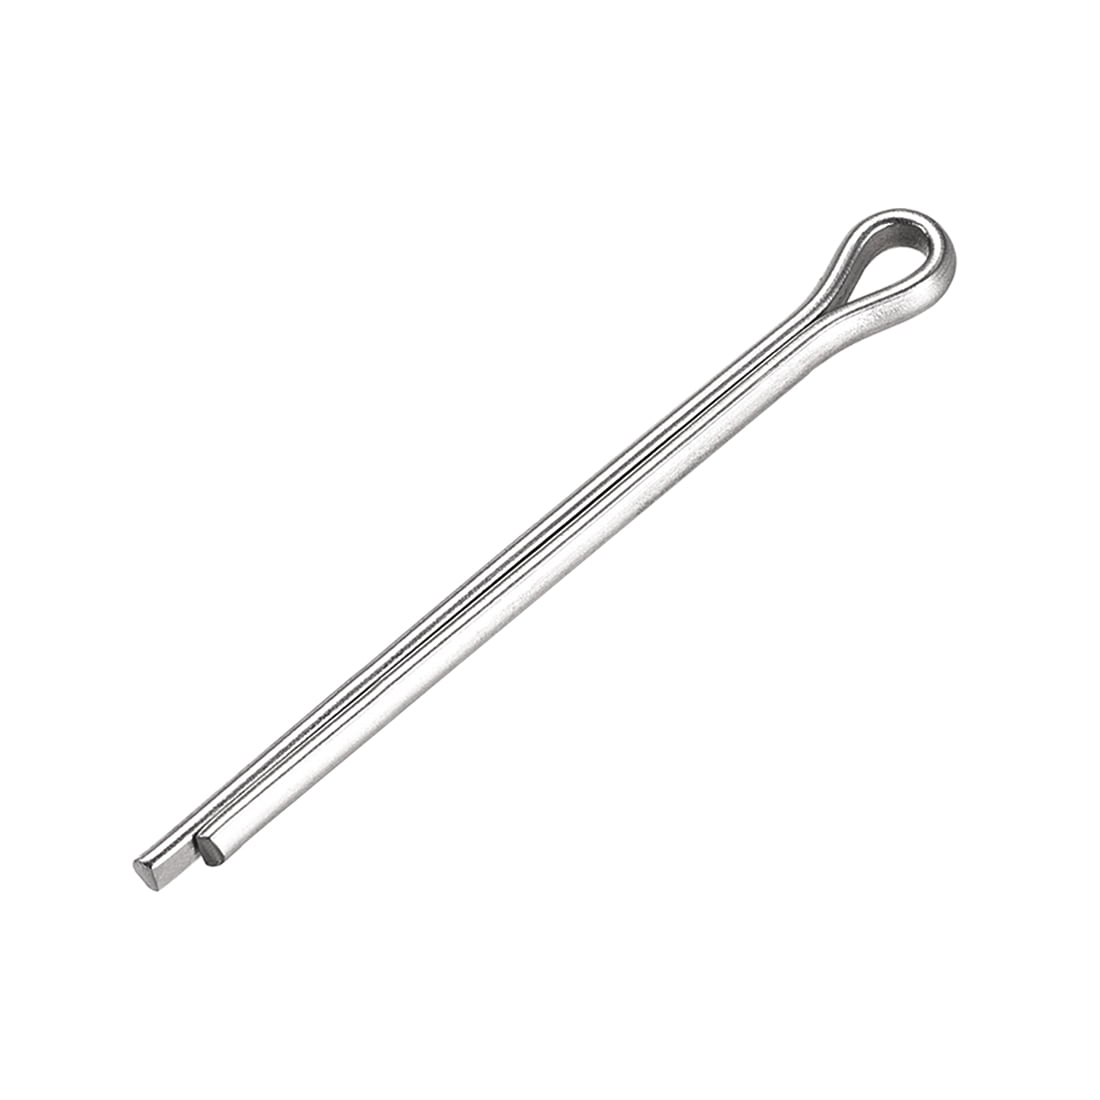 4mm x 50mm Split Cotter Pins Stainless Steel Marine Grade Pack of 20 